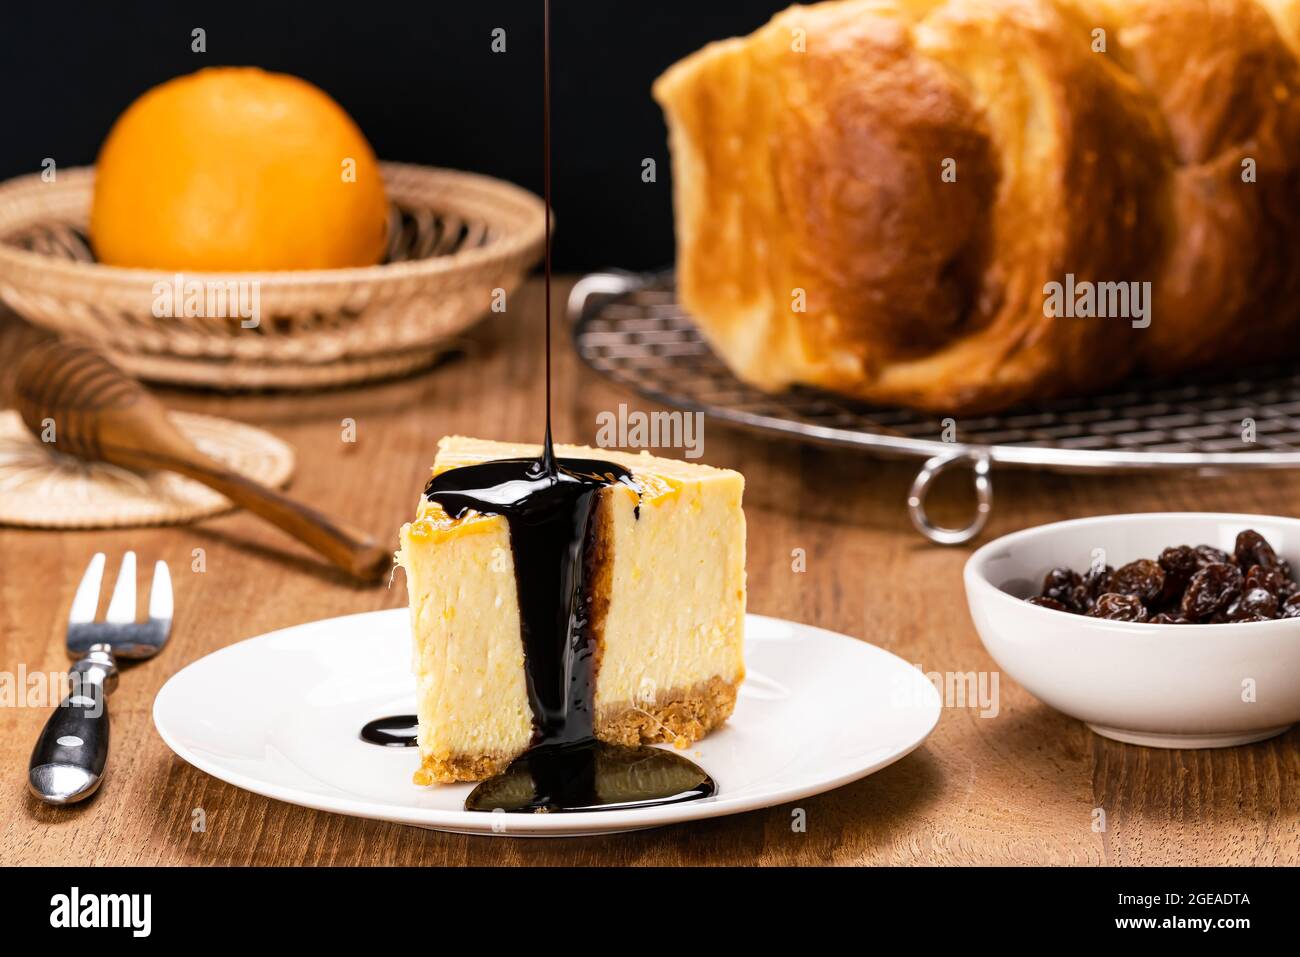 Pouring chocolate on delicious homemade mango cheesecake in white ceramic dish with metal fork, honey dipper, loaf of bread on cooling rack, ripe oran Stock Photo